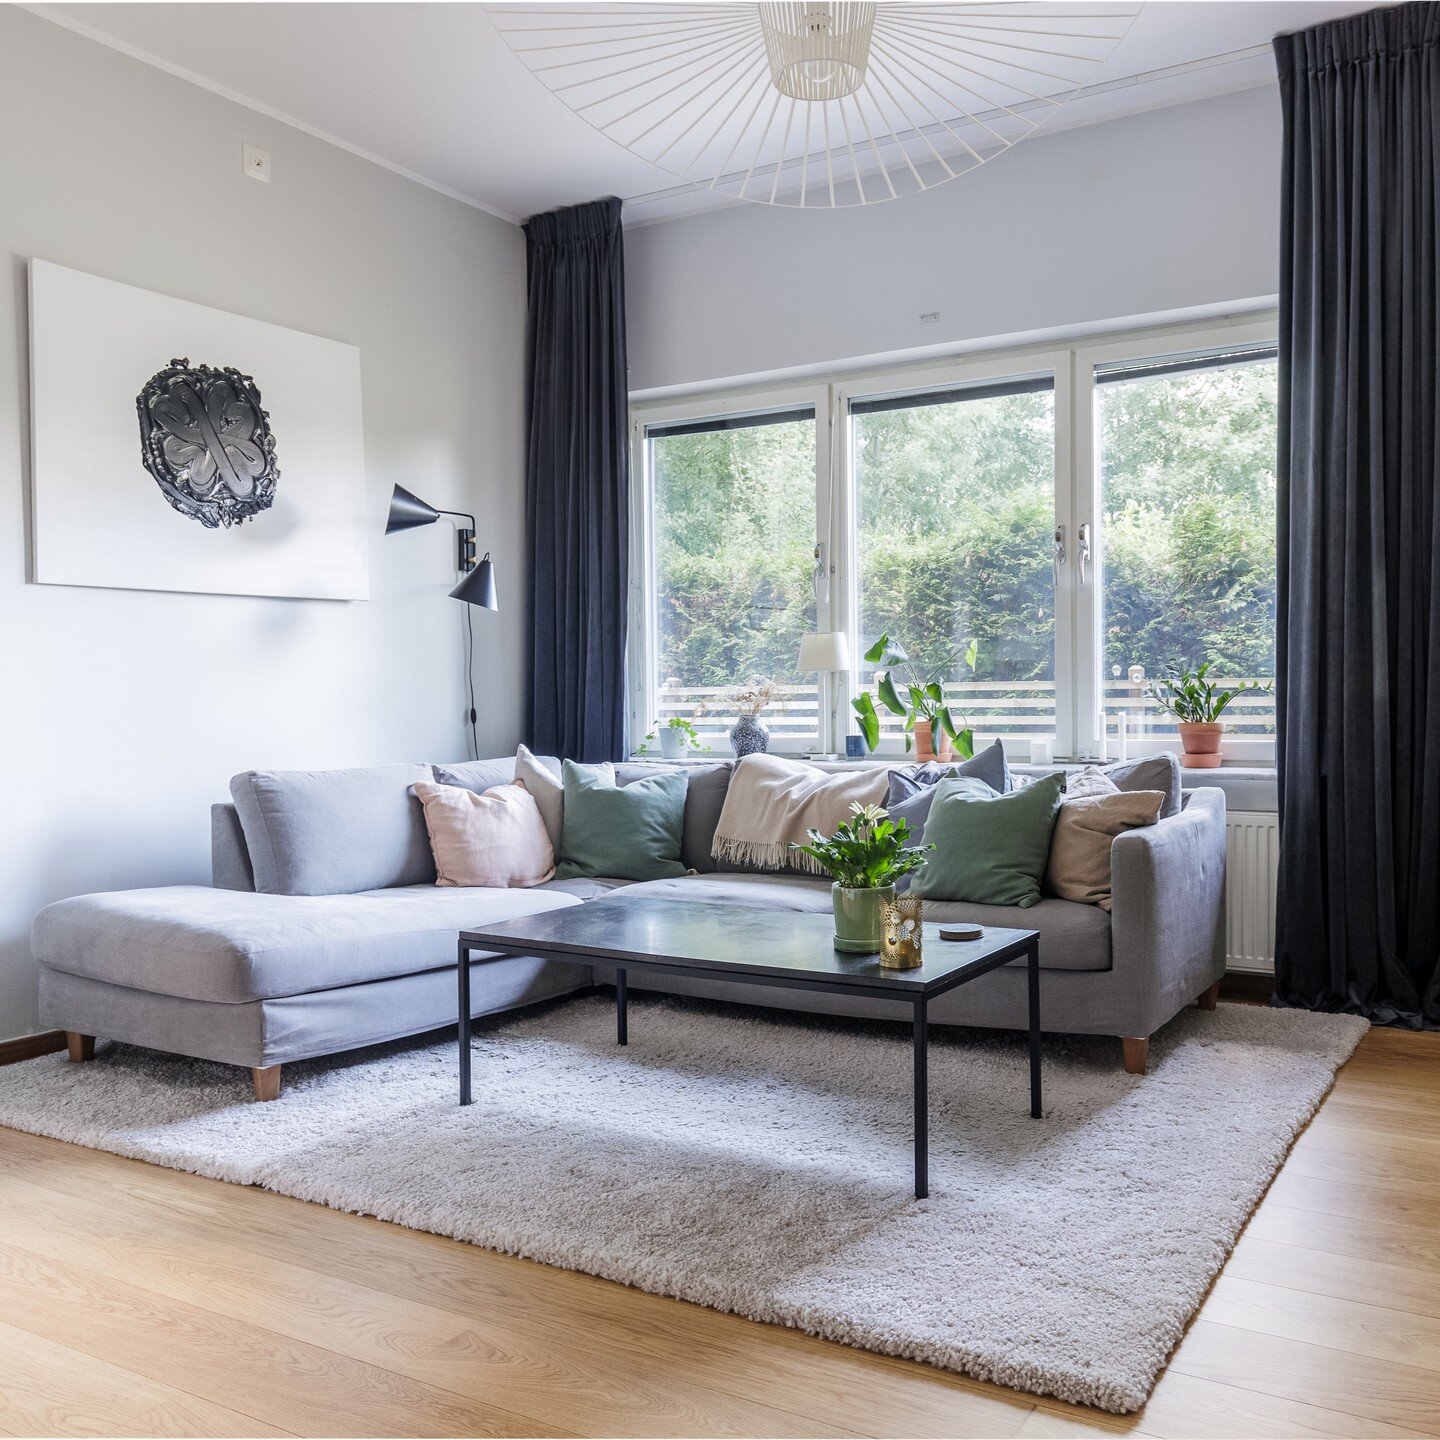 Great ground-floor apartment coming up from @maklarhuset.taby / @kais_ghedamsi has all the details. Perfect if you're looking for something close to the red line.